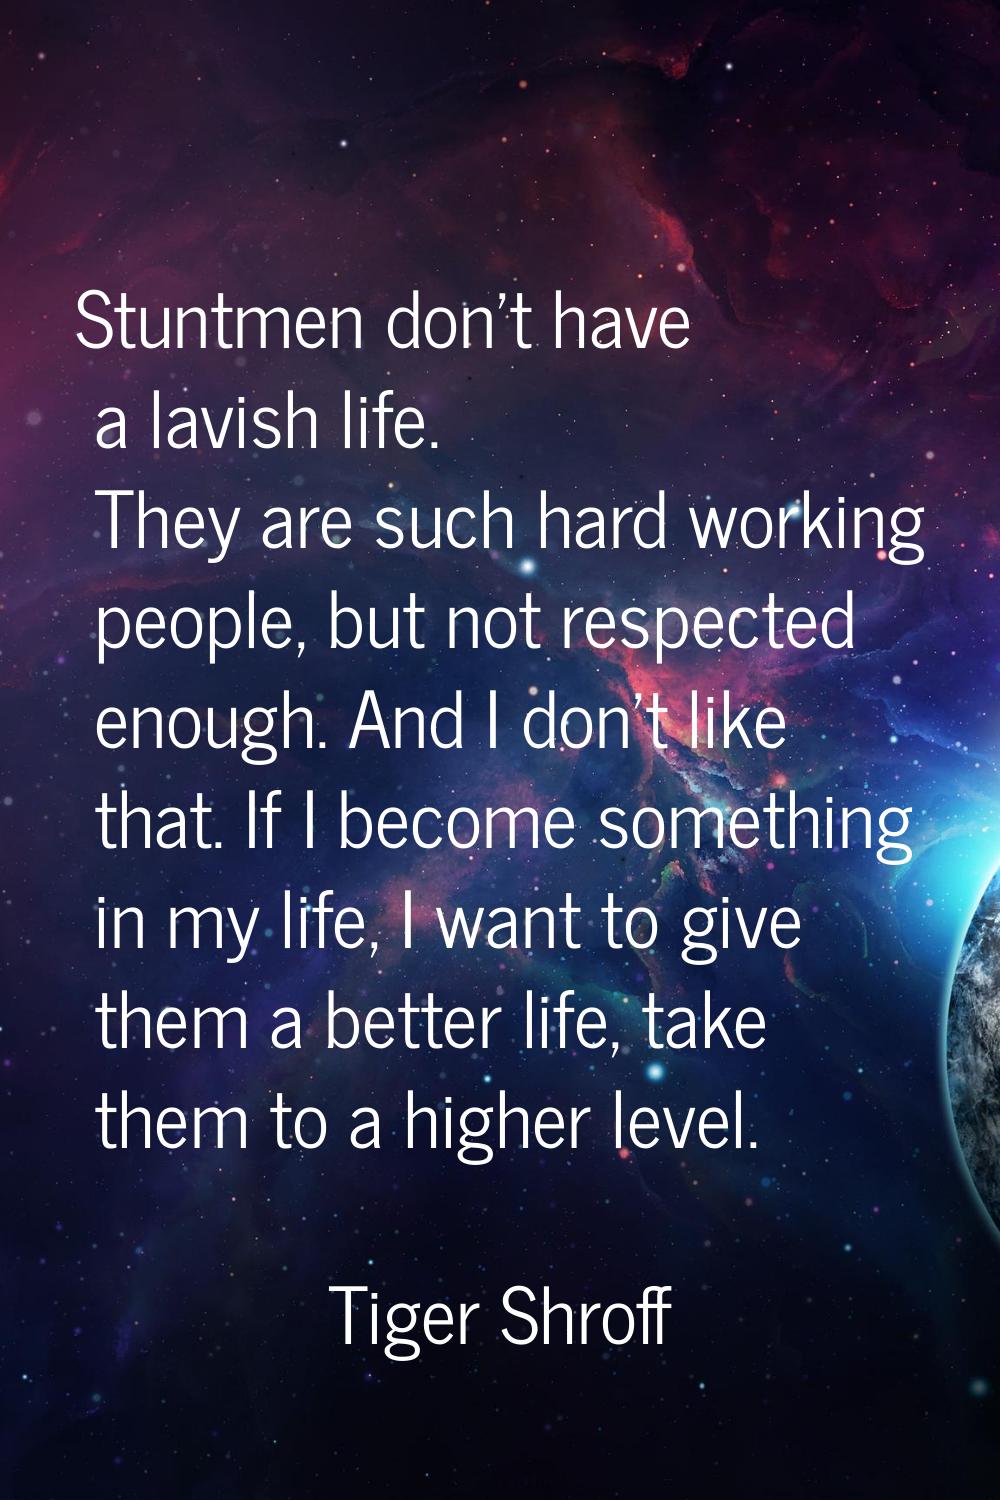 Stuntmen don't have a lavish life. They are such hard working people, but not respected enough. And